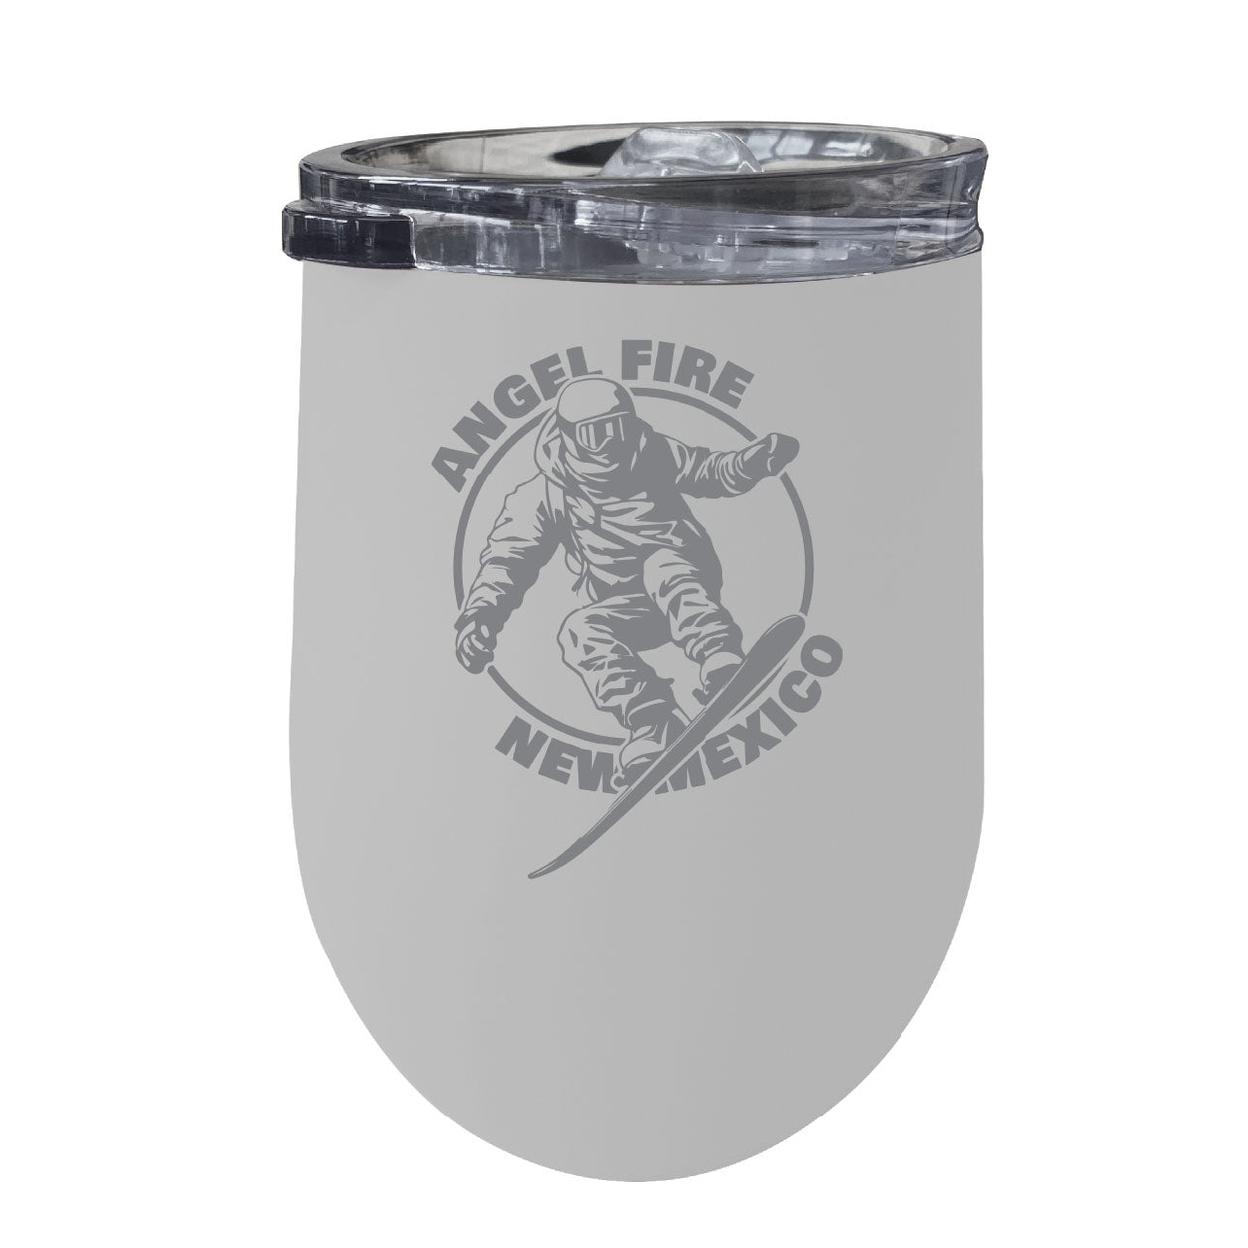 Angel Fire New Mexico Souvenir 12 Oz Engraved Insulated Wine Stainless Steel Tumbler - White,,Single Unit